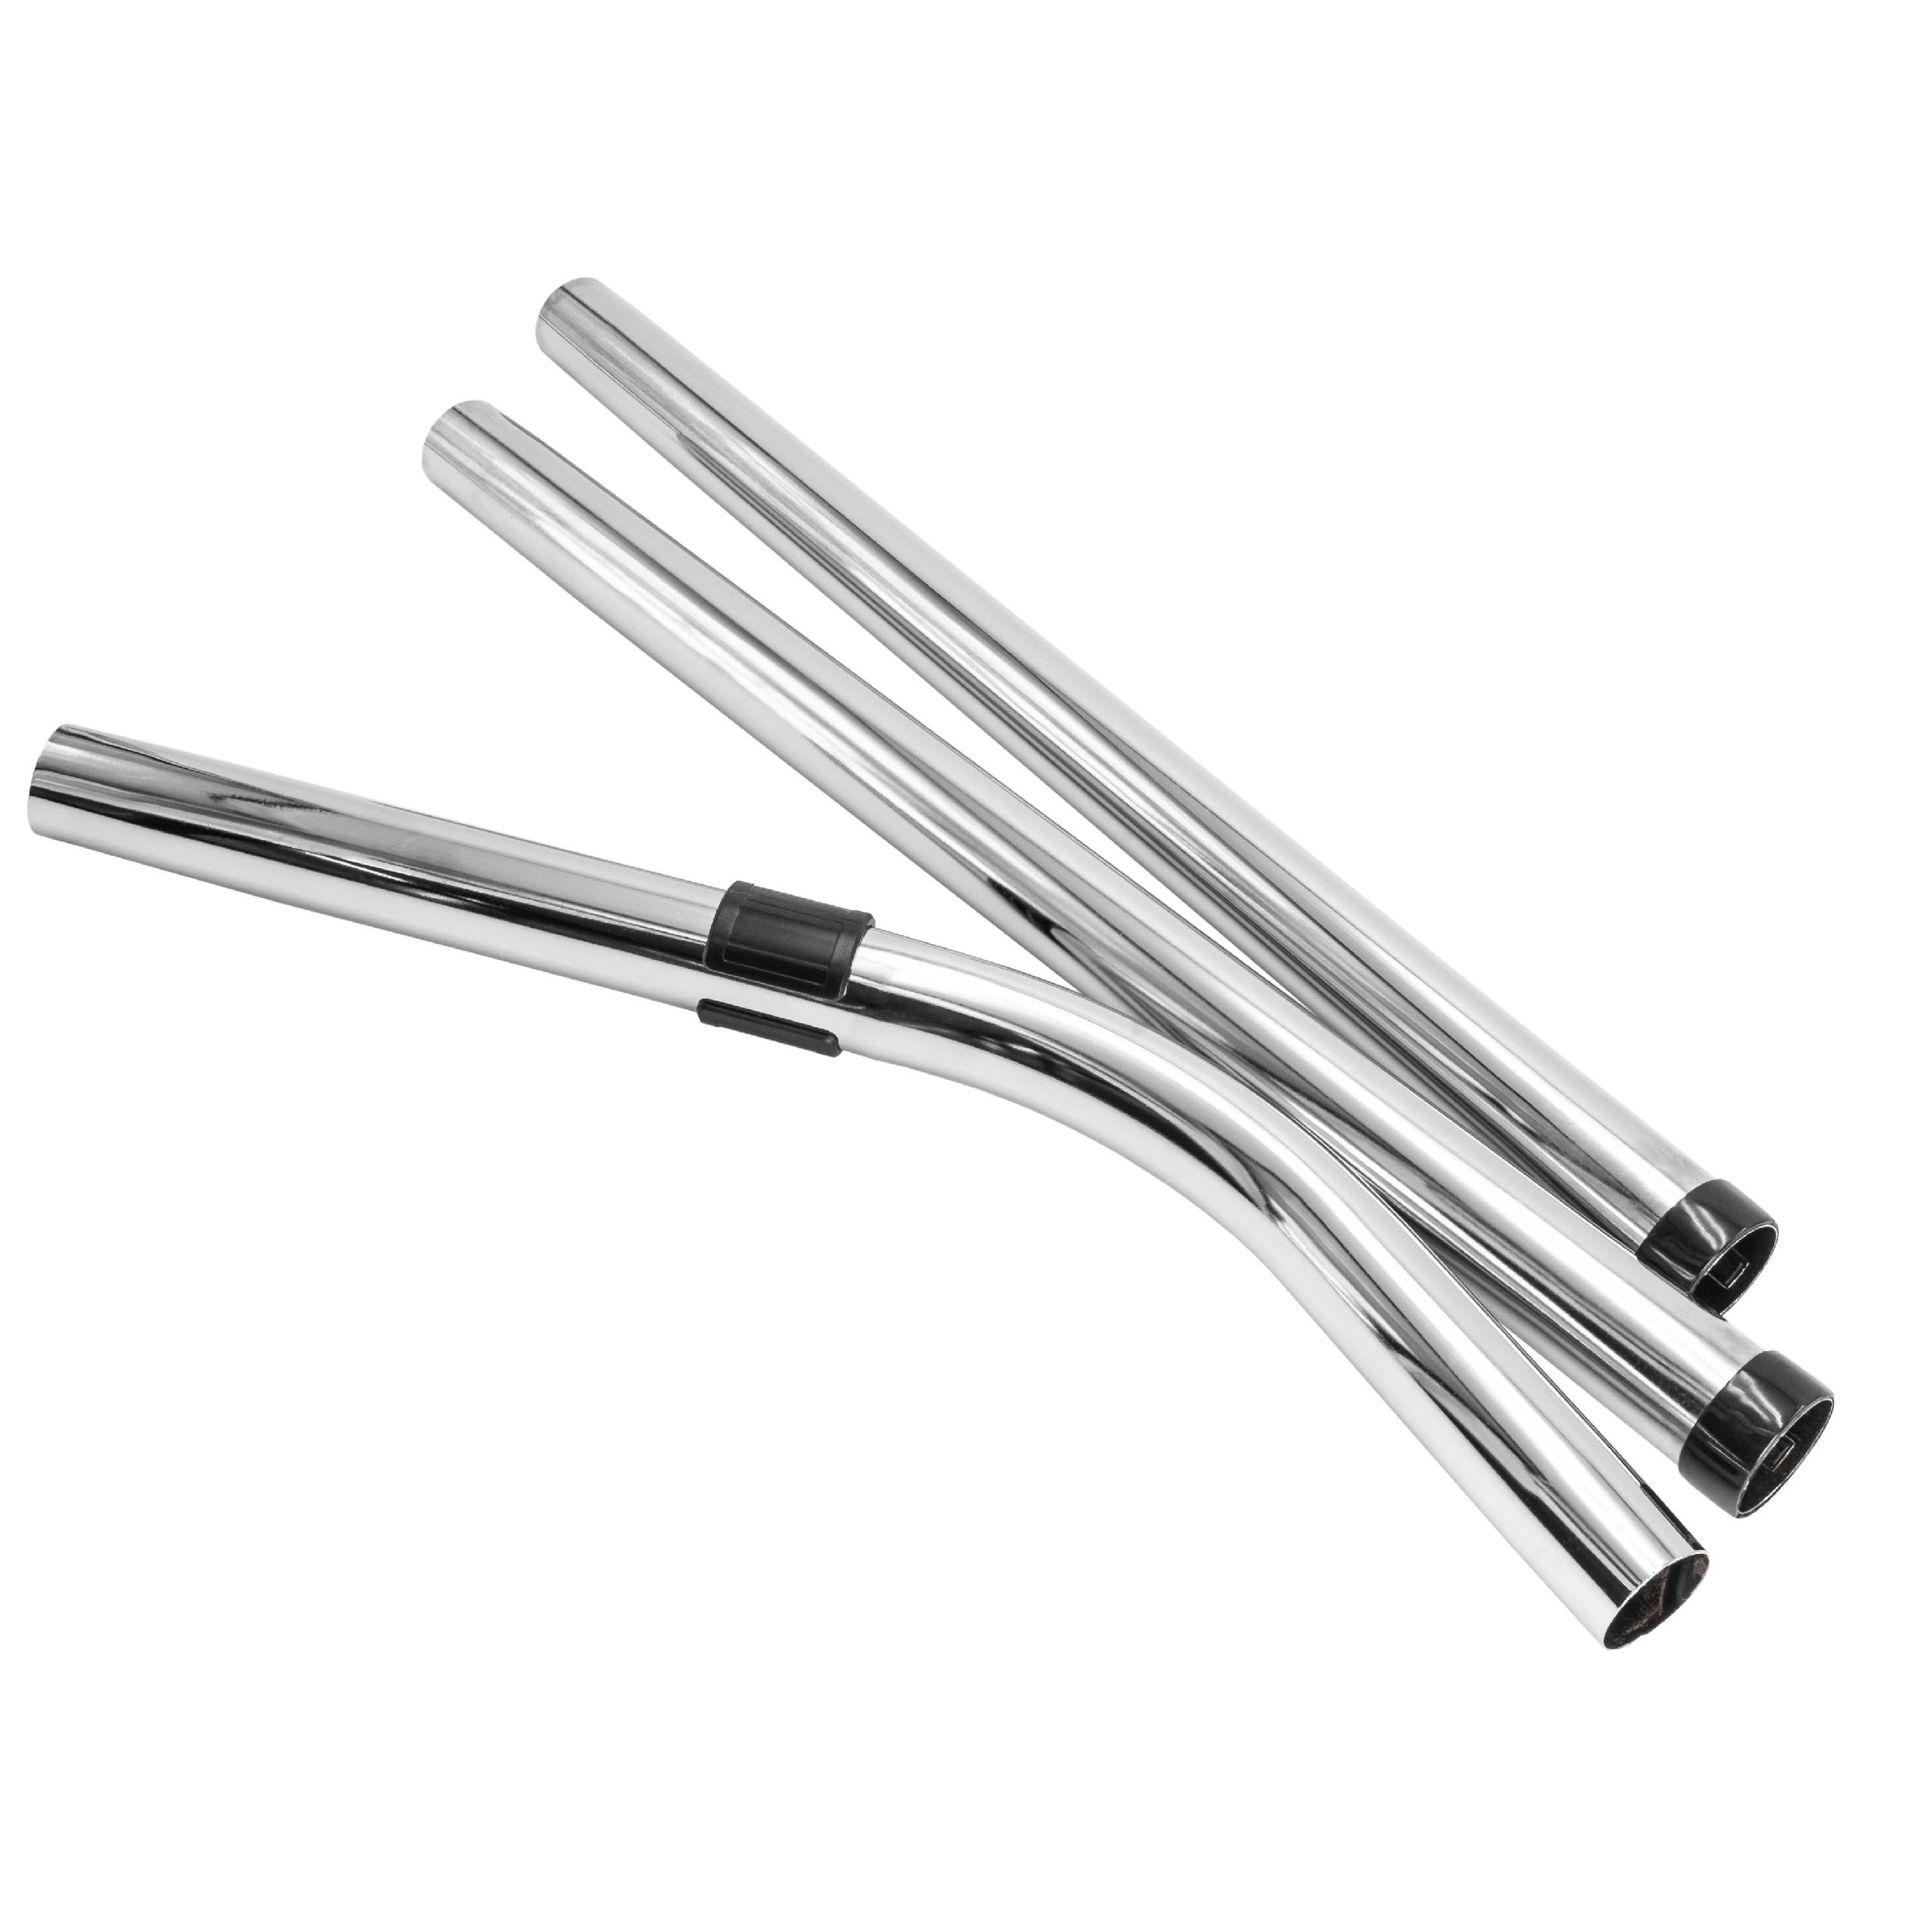 3x Tube as Replacement for Numatic 69-NM-250, 601053V for Numatic Vacuum Cleaner - Length: 50 - 150 cm, silver